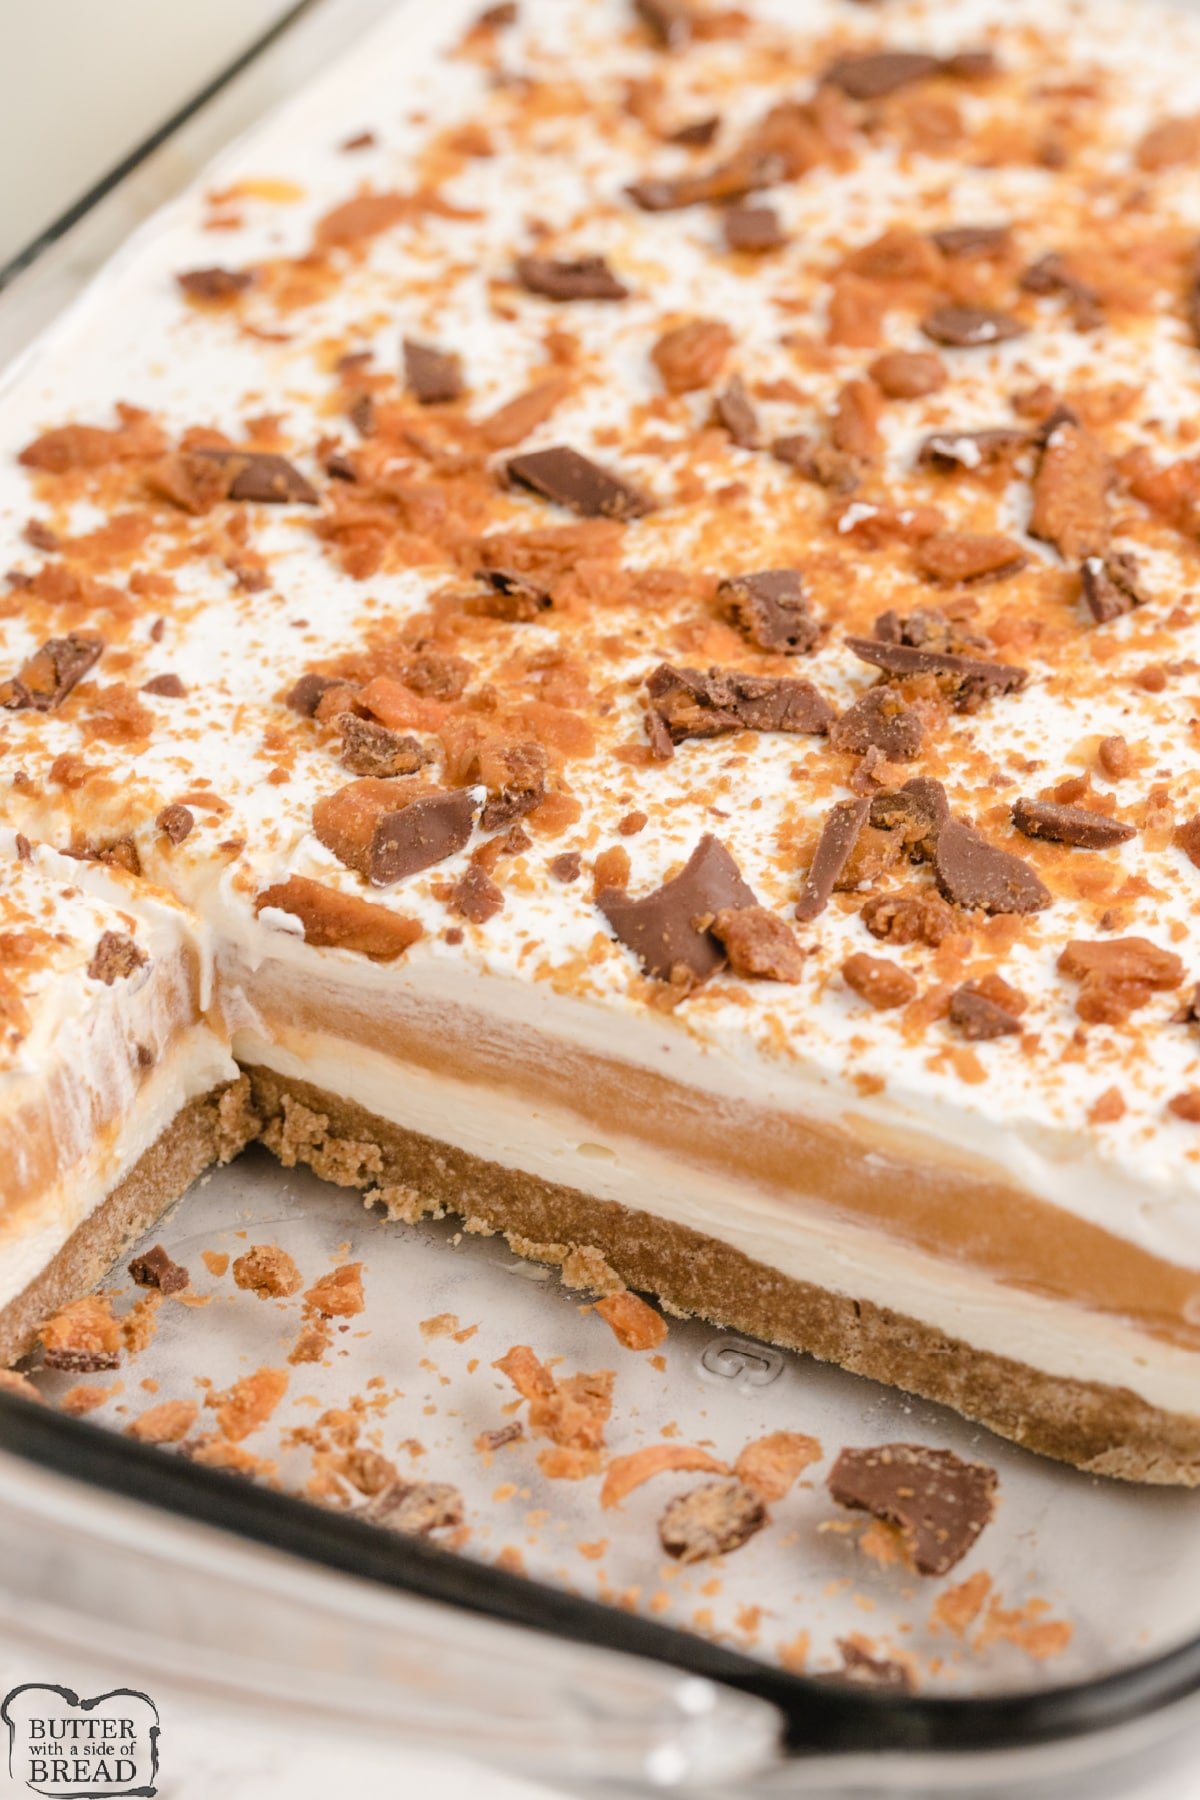 Butterscotch Lush is a no bake dessert made with a graham cracker crust topped with layers of sweetened cream cheese and butterscotch pudding. Simple butterscotch dessert that is assembled in minutes! 